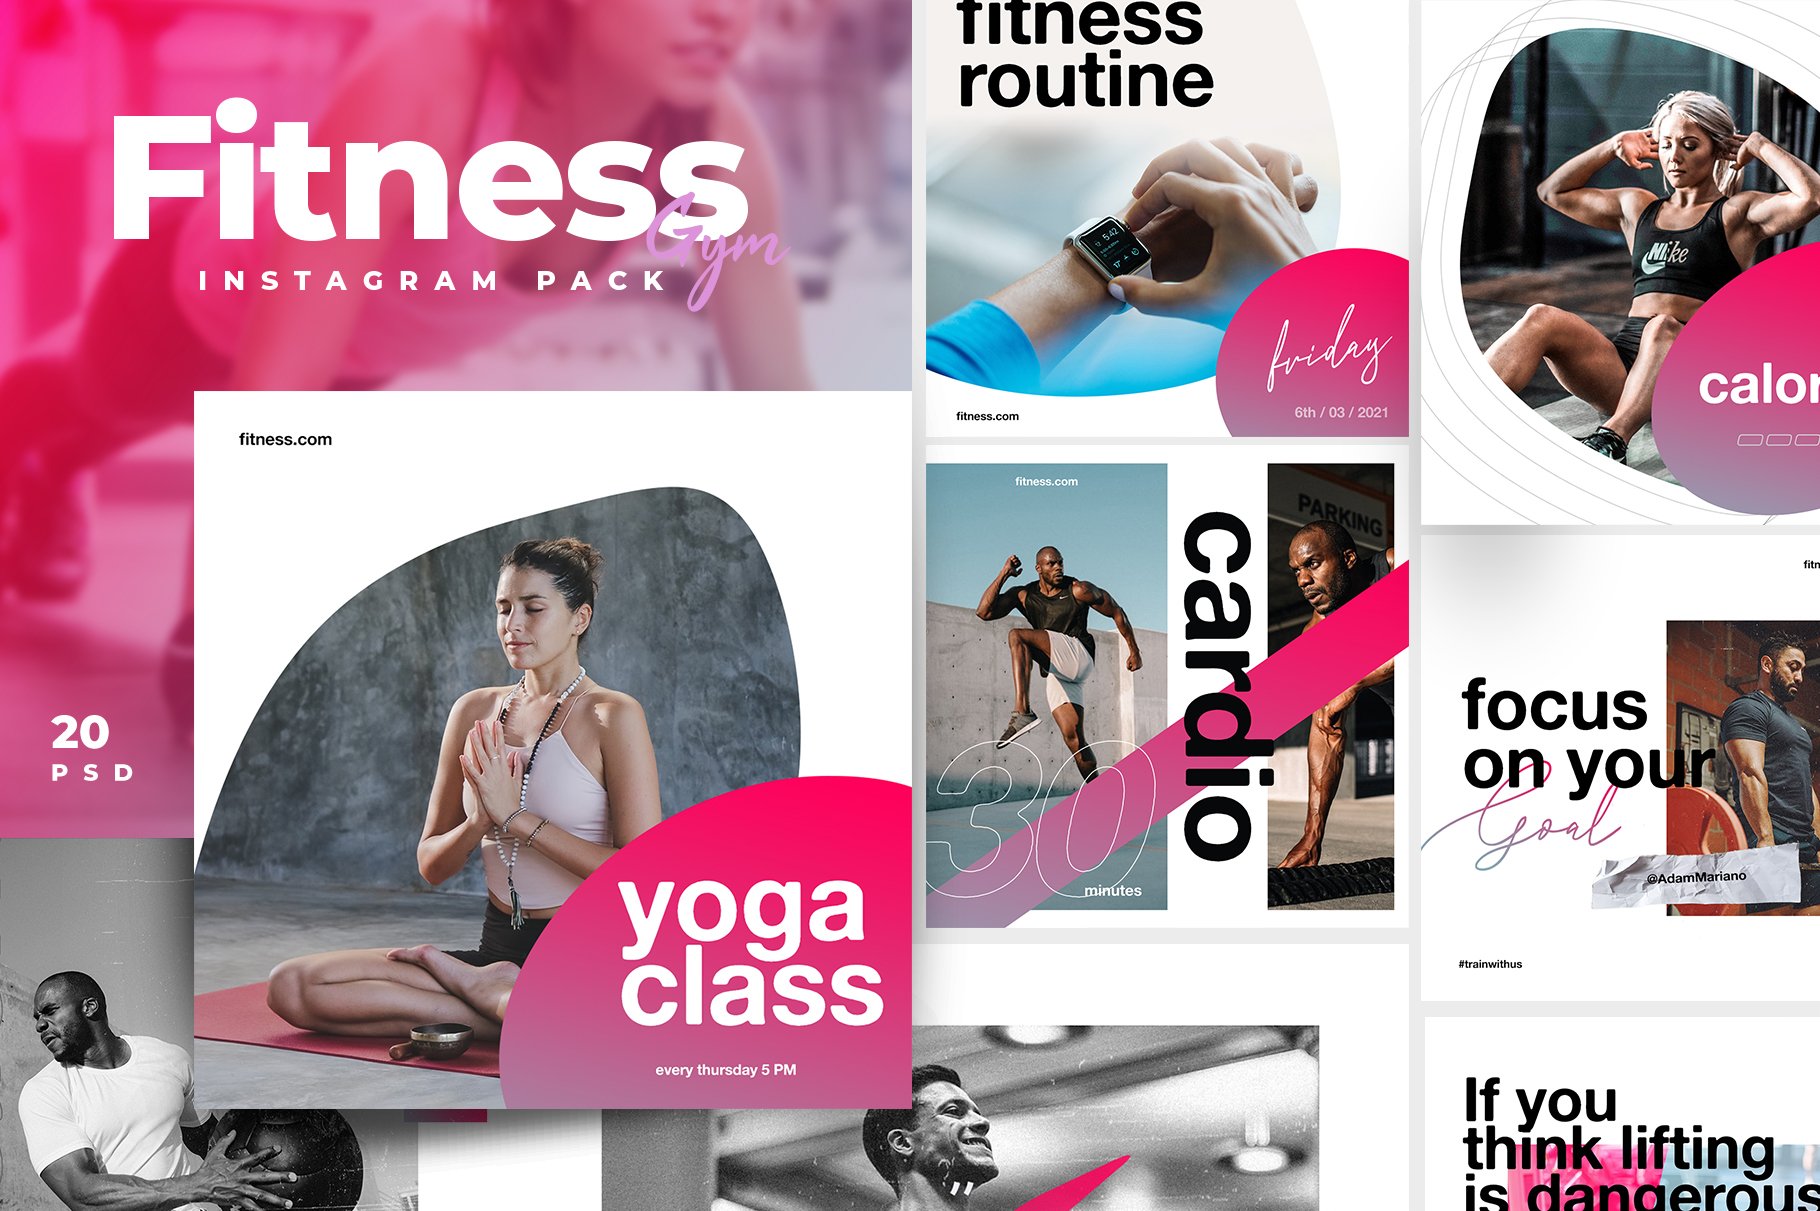 Fitness & Gym instagram 4.0 cover image.